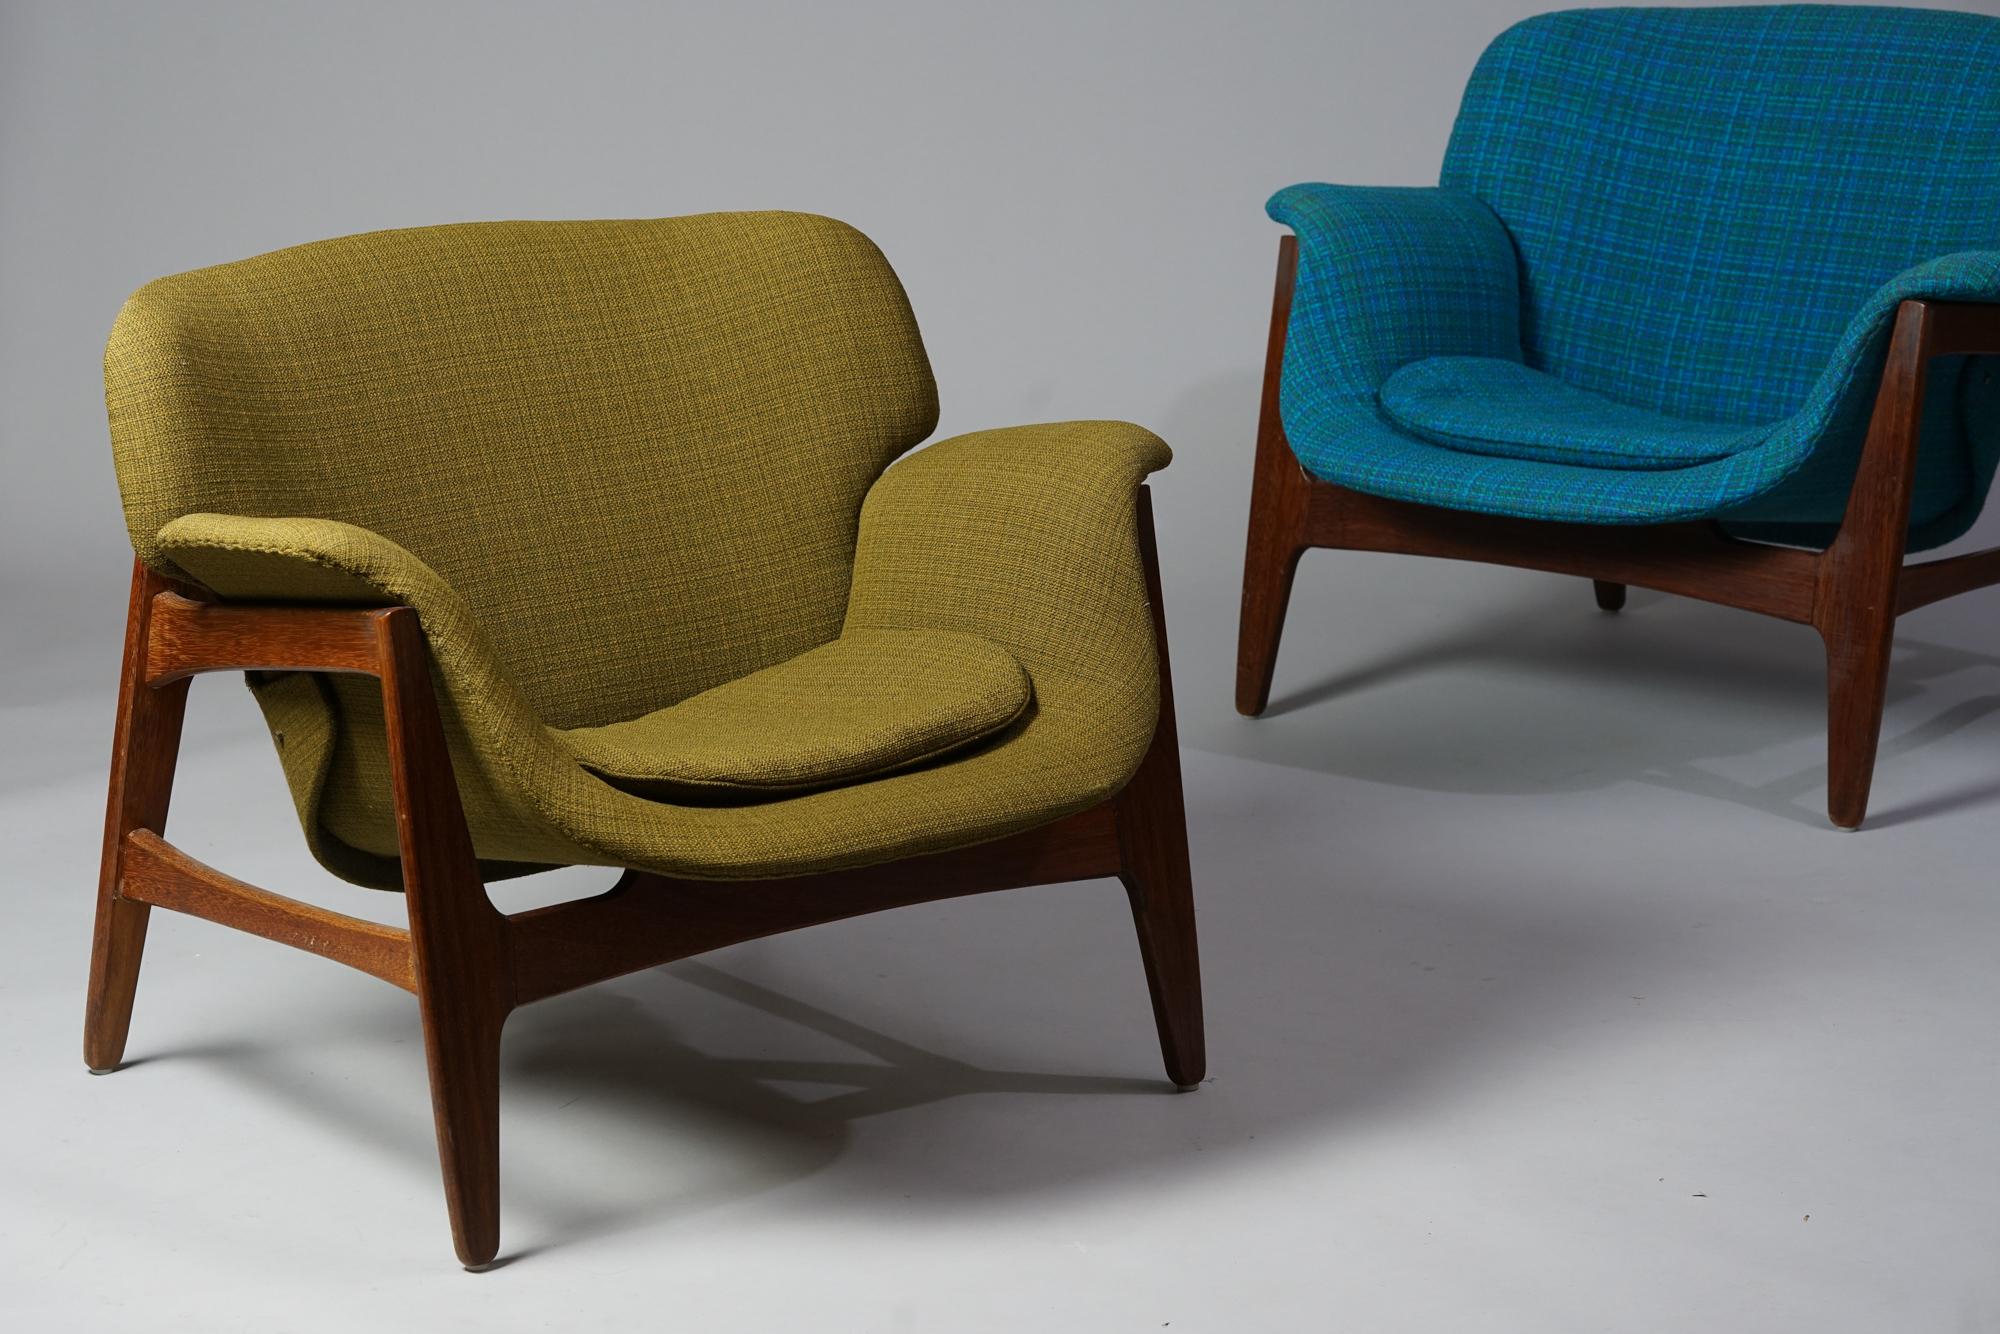 Scandinavian modern set of arm chairs by Carin Bryggman for Boman OY, 1950s/1960s, teak frame, green and turquoise wool upholstery. Good vintage condition, minor wear consistent with age and use. The two armchairs are sold together. 

In Carin